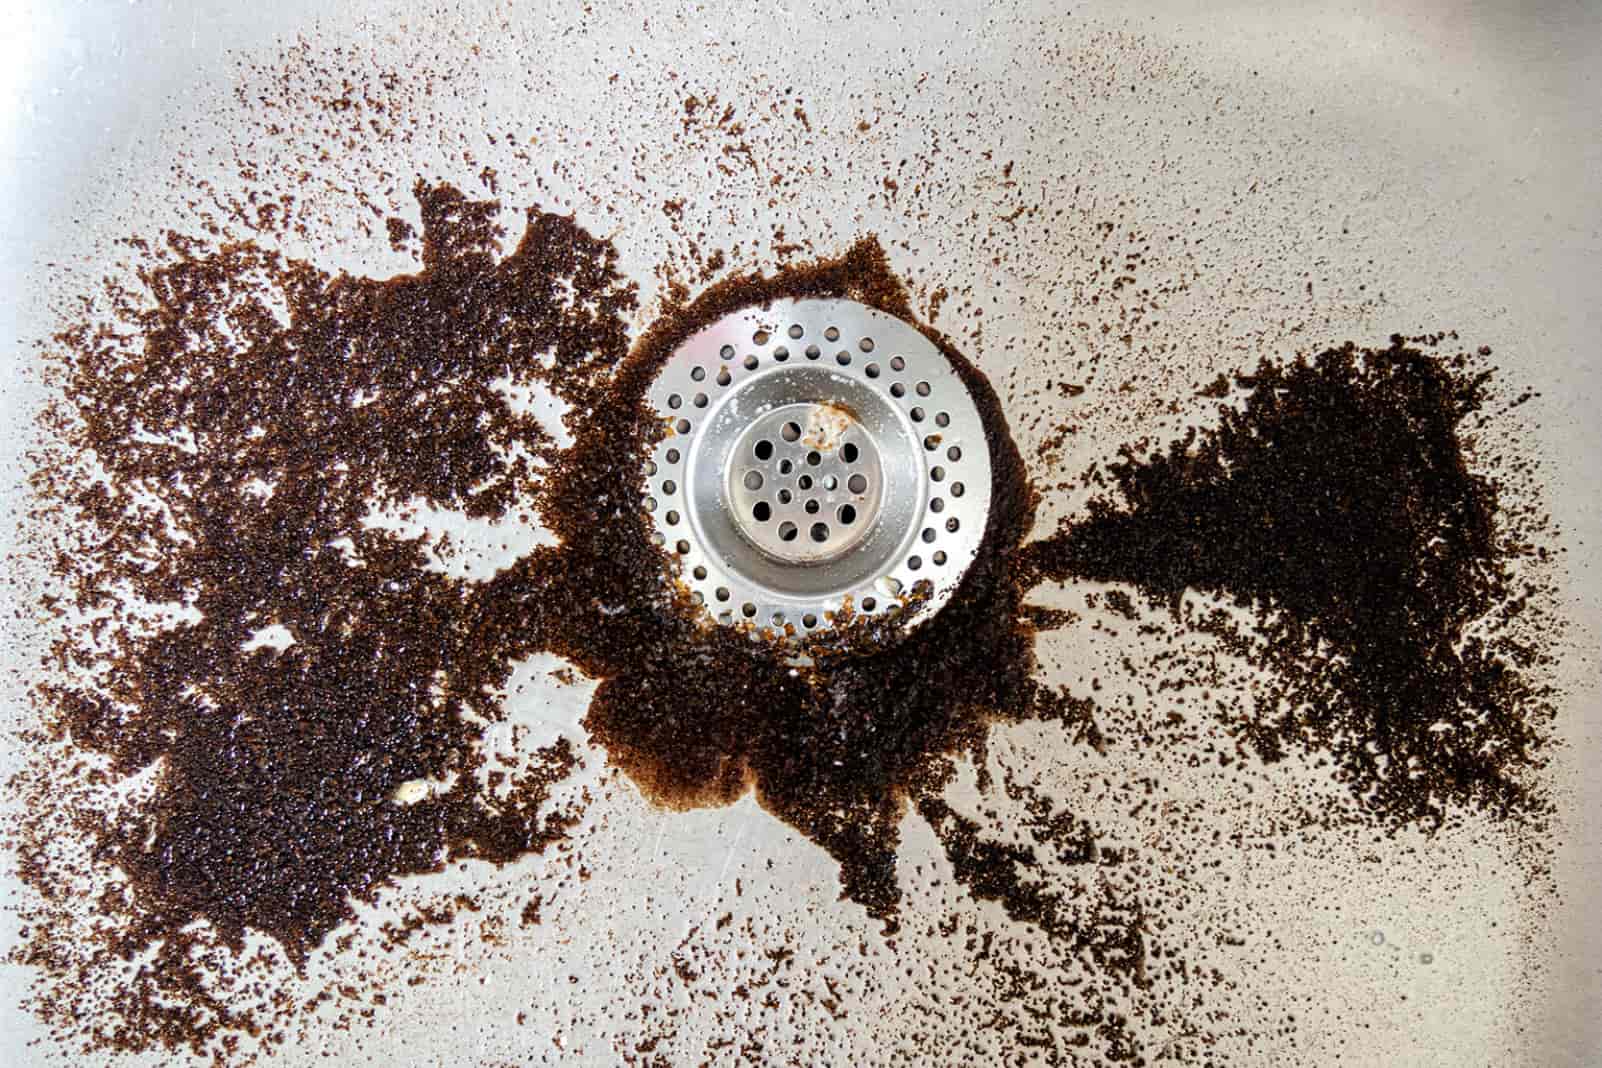 How do you make coffee grounds sink?